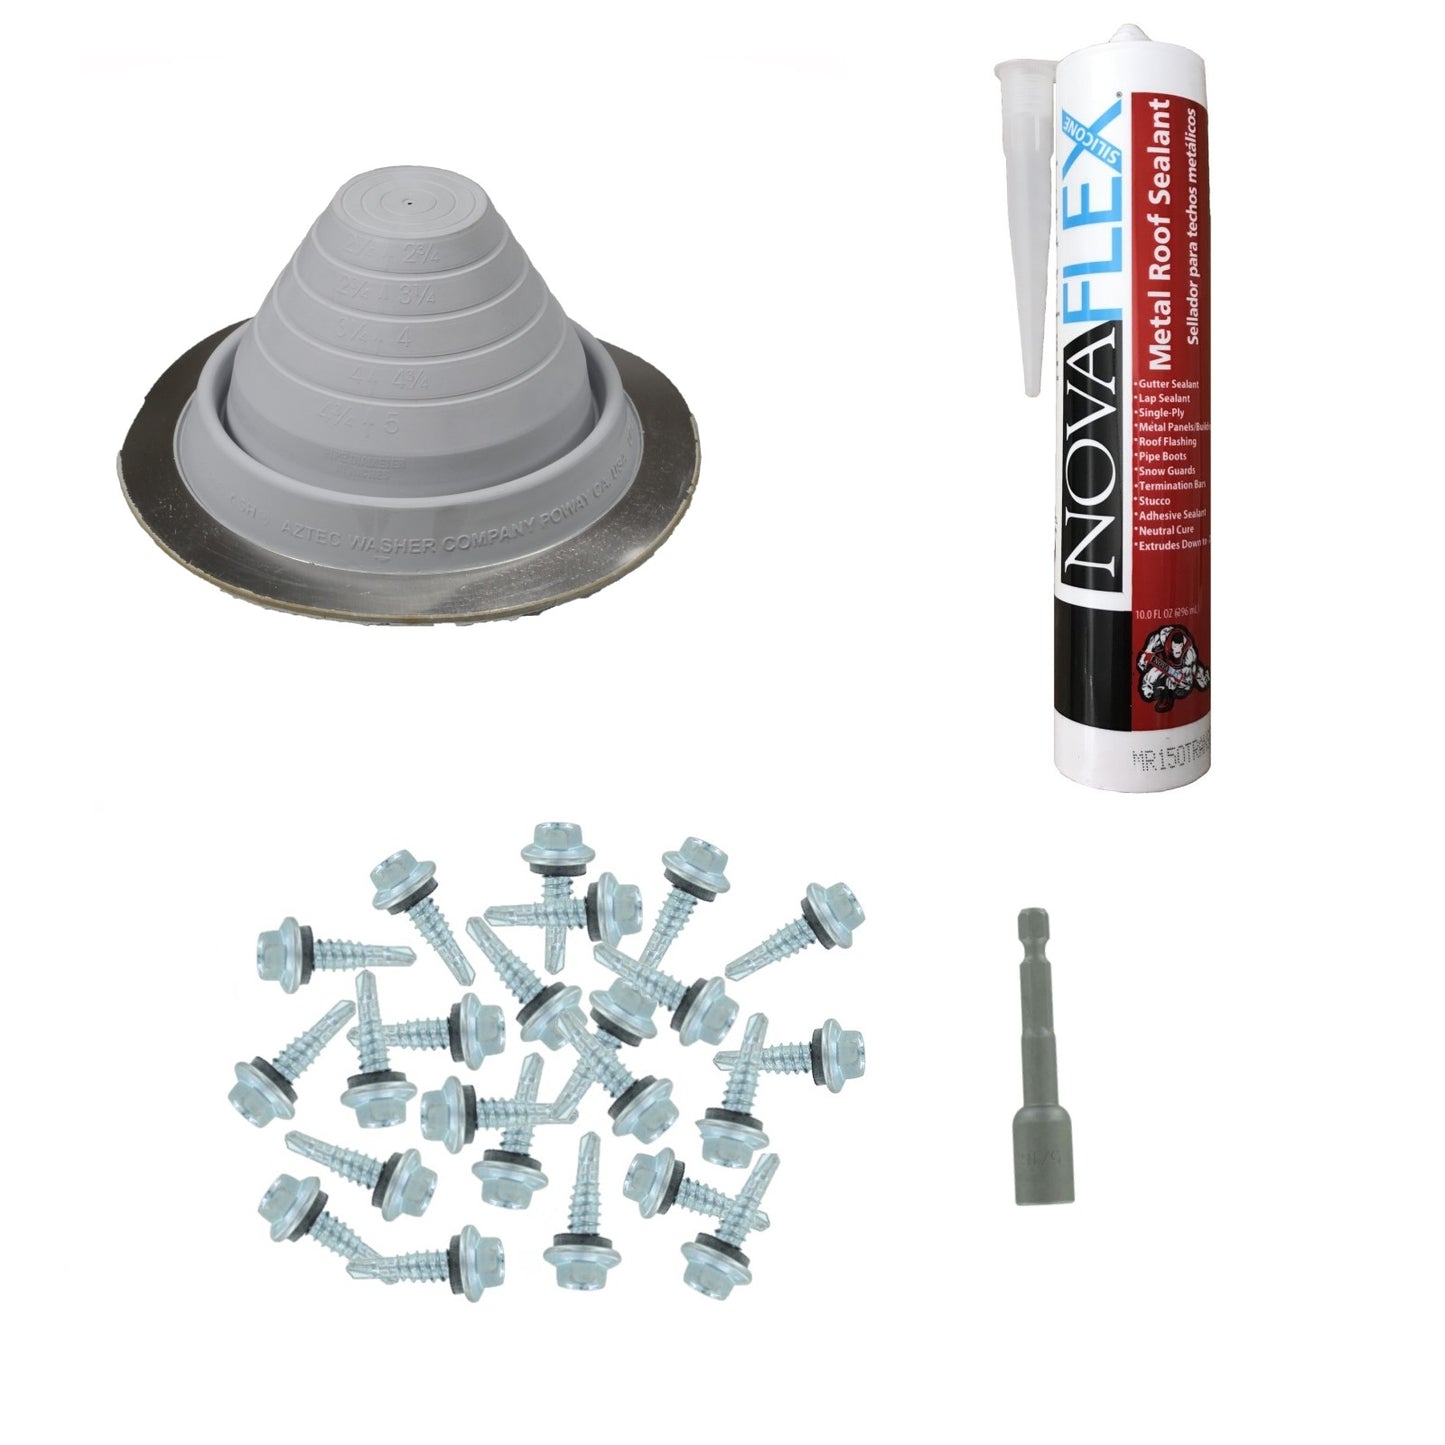 #3 Round EPDM Metal Roof Pipe Boot wInstall Kit Gray